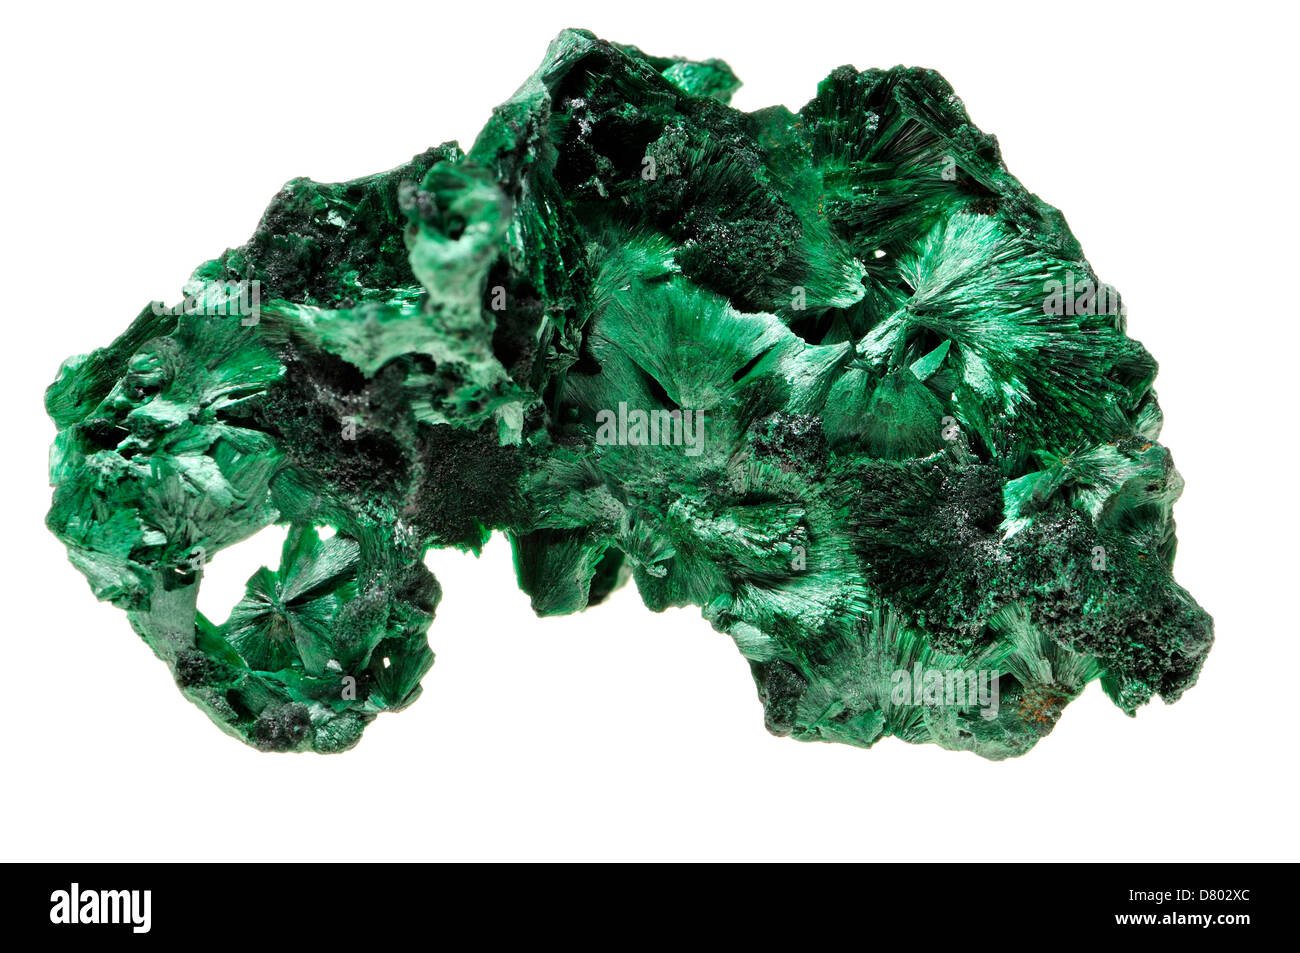 Malachite [green copper carbonate hydroxide] Fibrous chatoyant form giving cat's eye effect Stock Photo